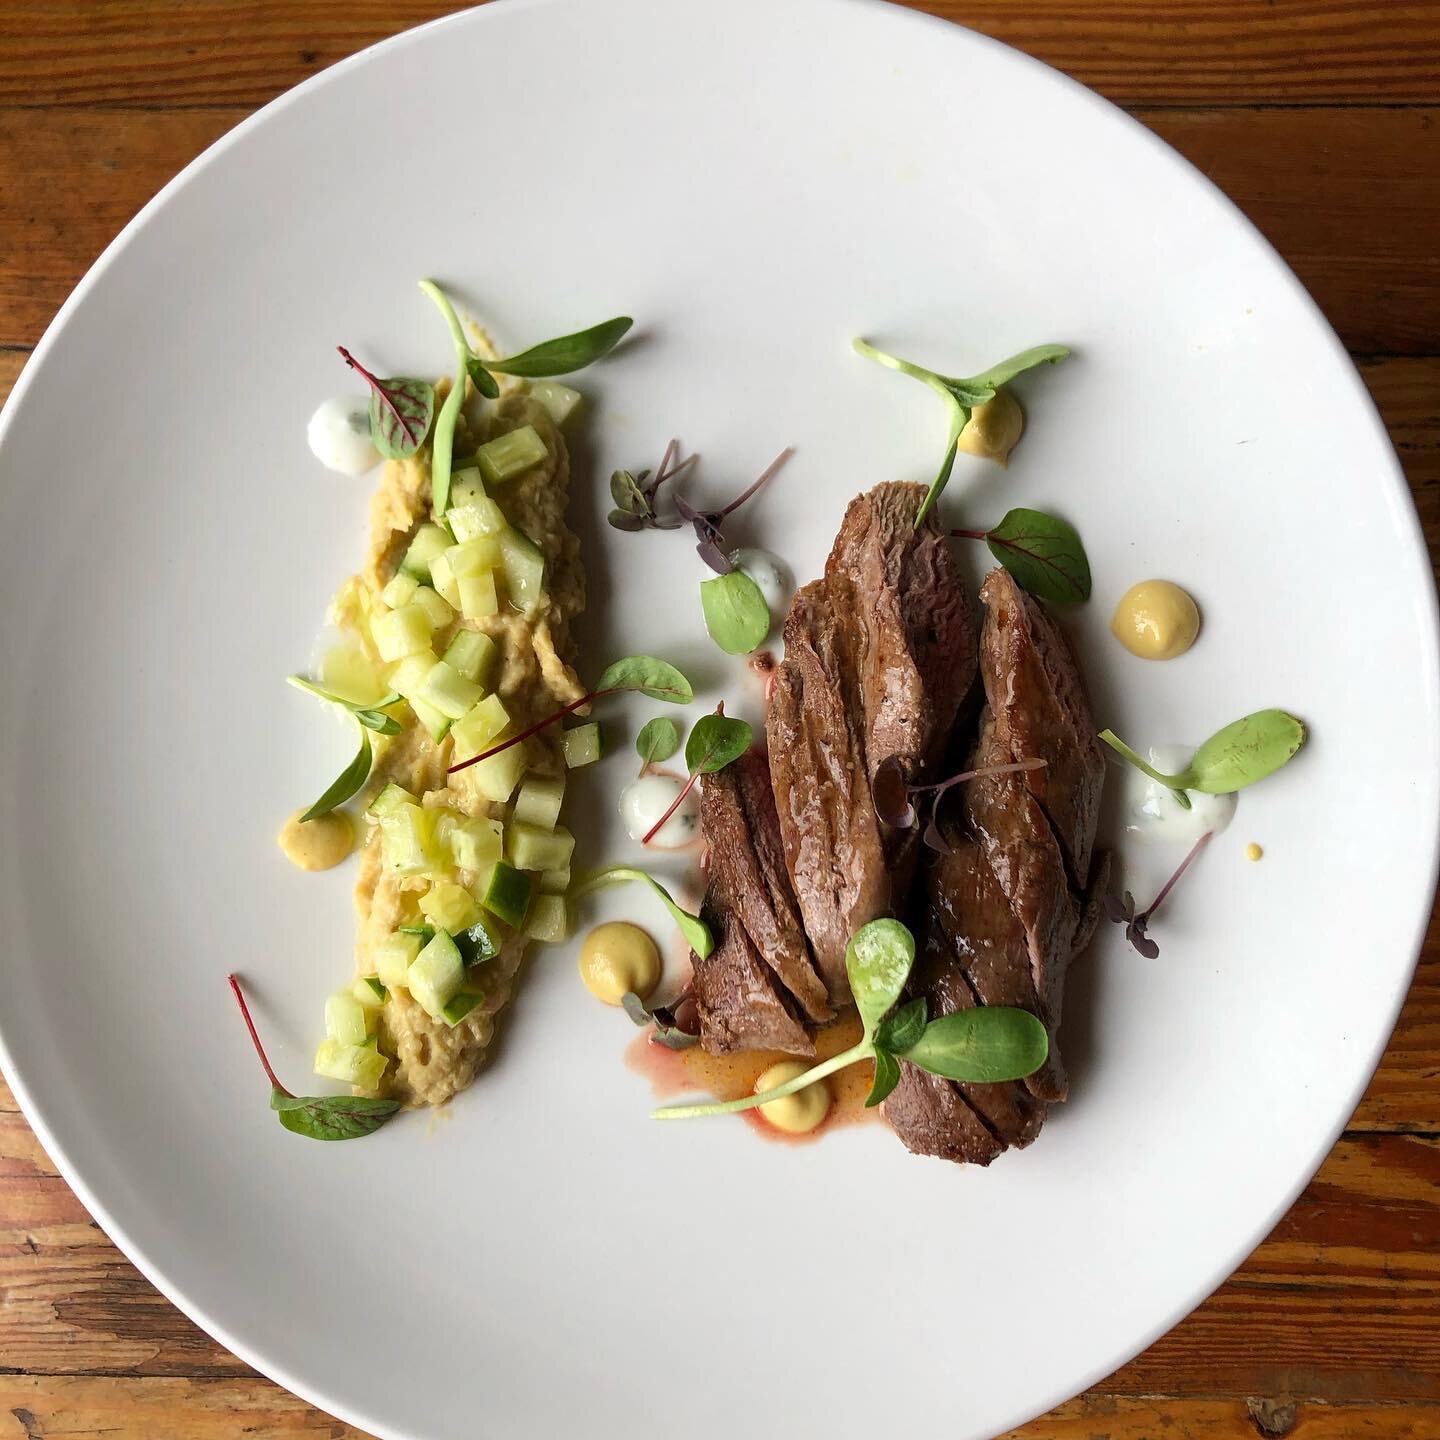 This weekend&rsquo;s chef special is a great one. Lamb tenderloin with roasted garlic, grainy mustard, cucumber, dill, Greek yogurt, glac&eacute; de viande, choice of 2 sides.